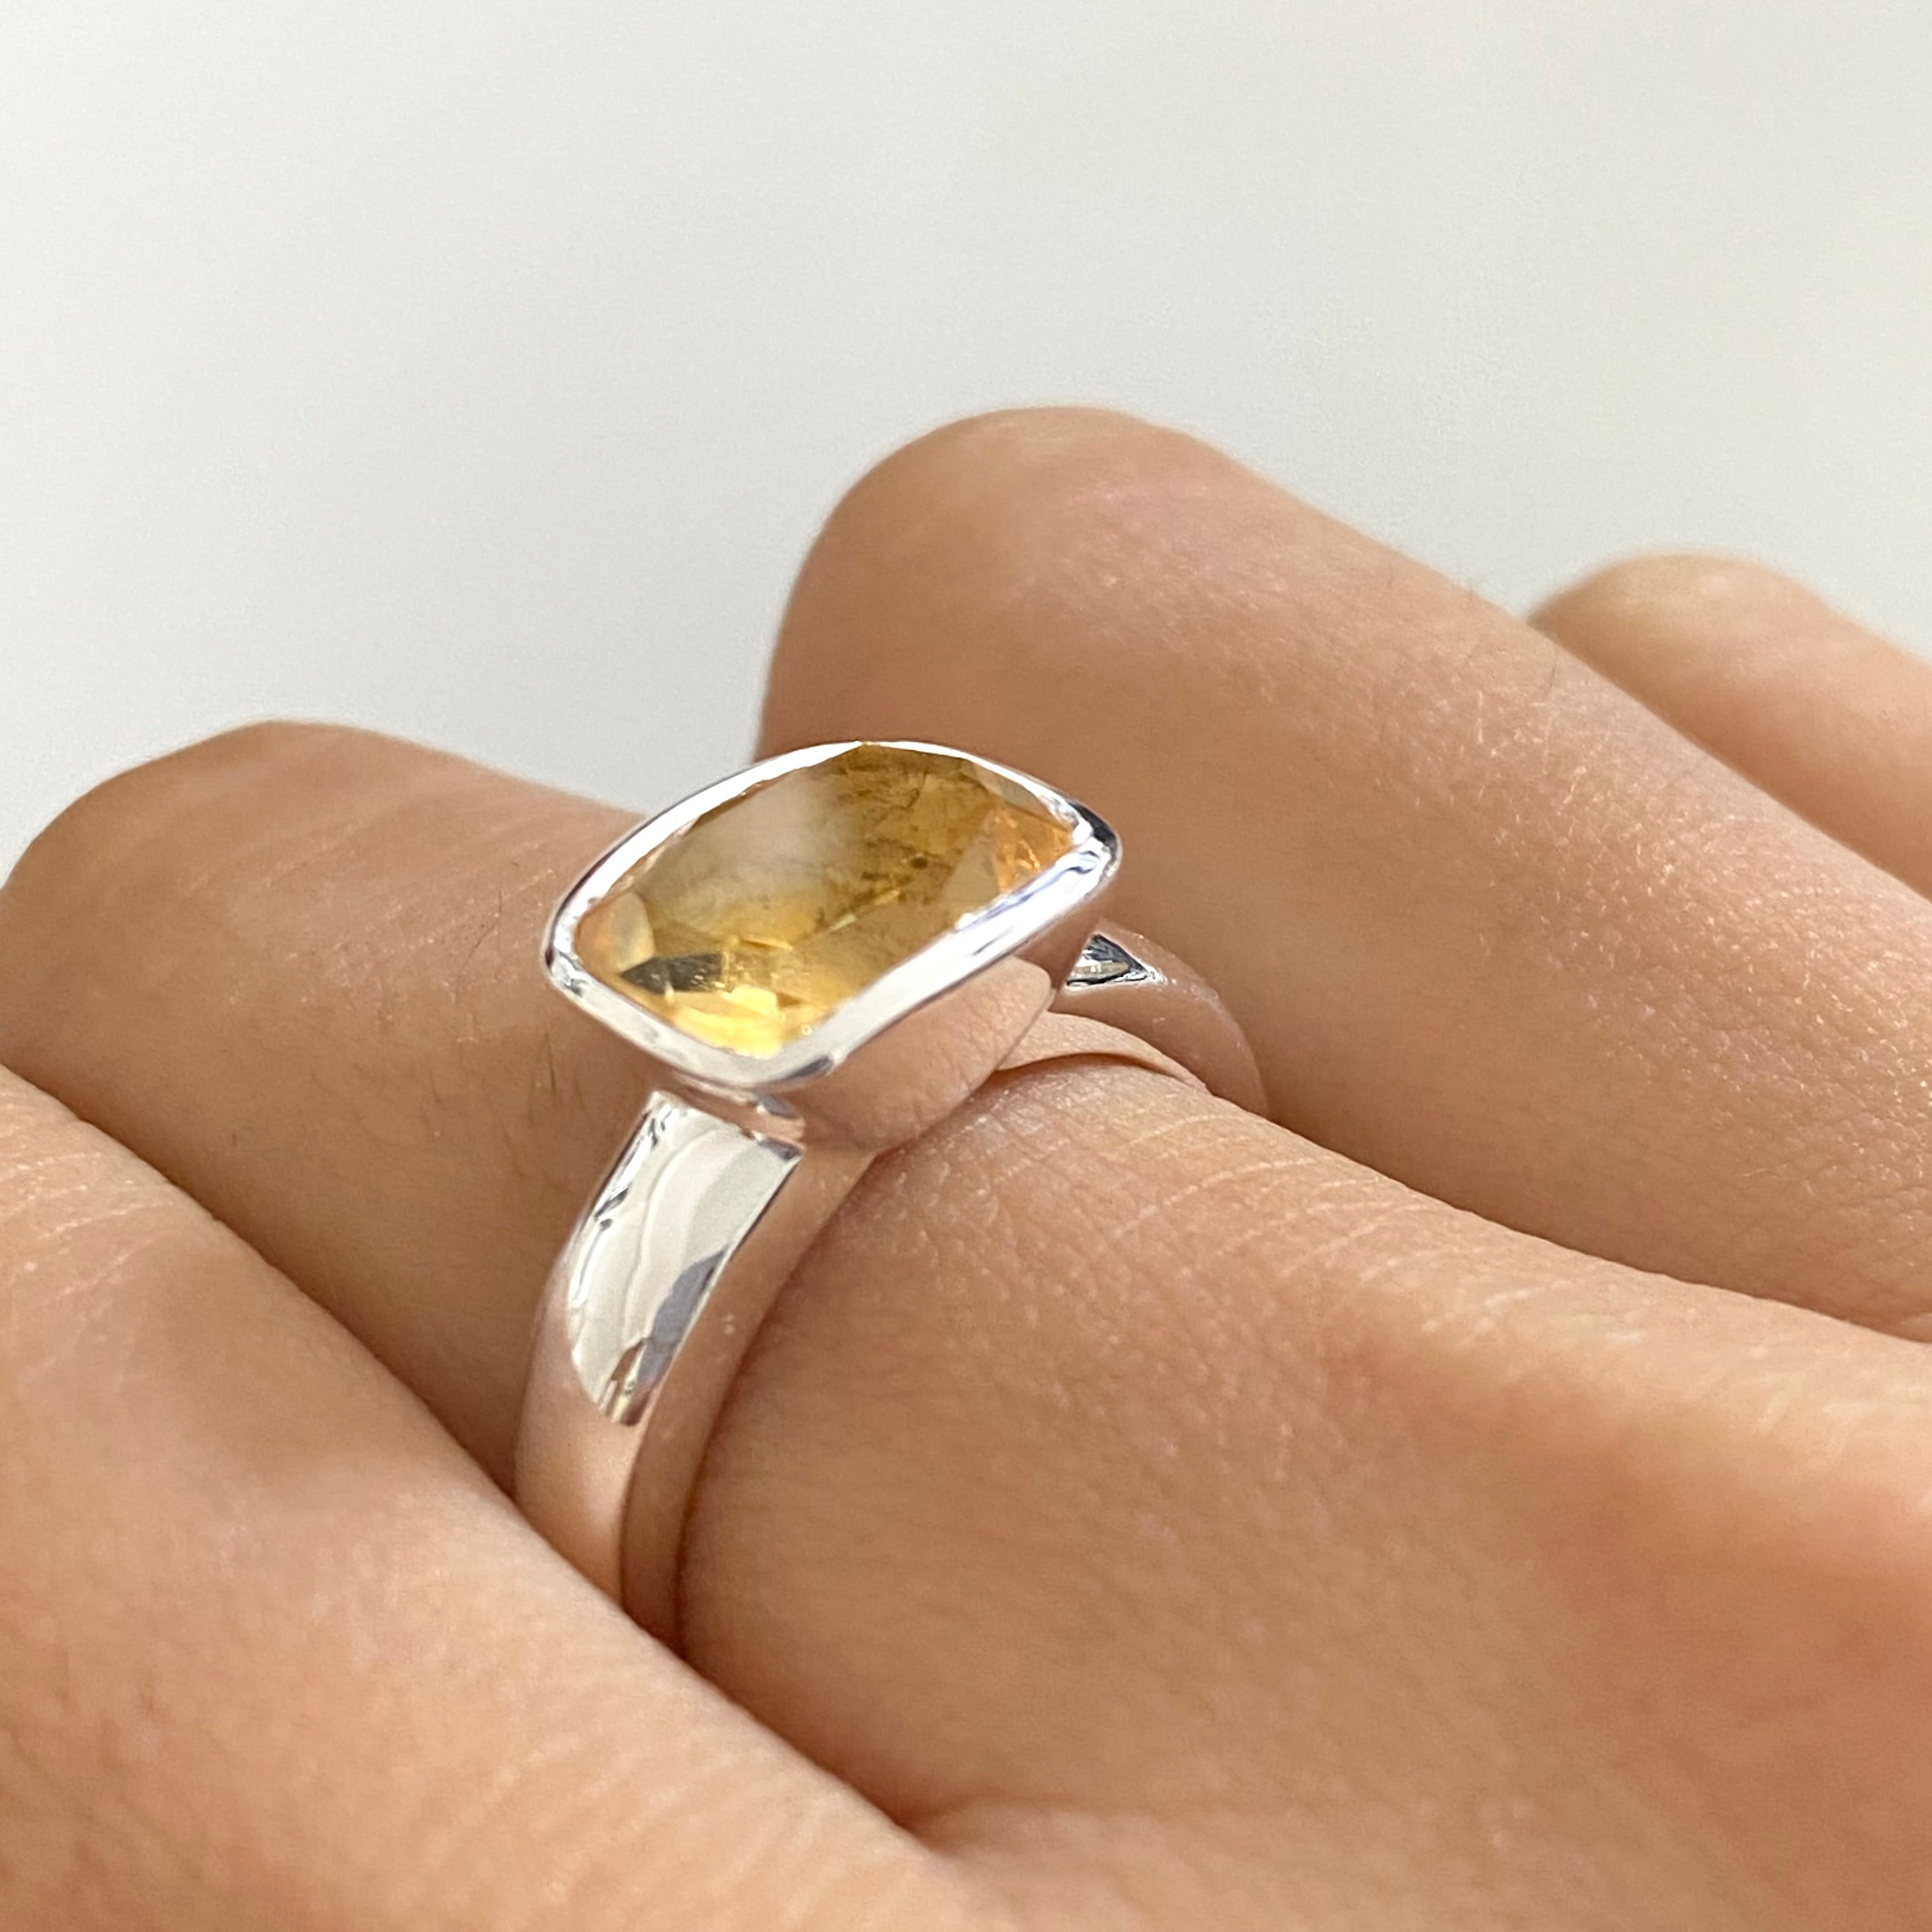 Faceted Rectangular Cut Natural Gemstone Sterling Silver Ring - Citrine